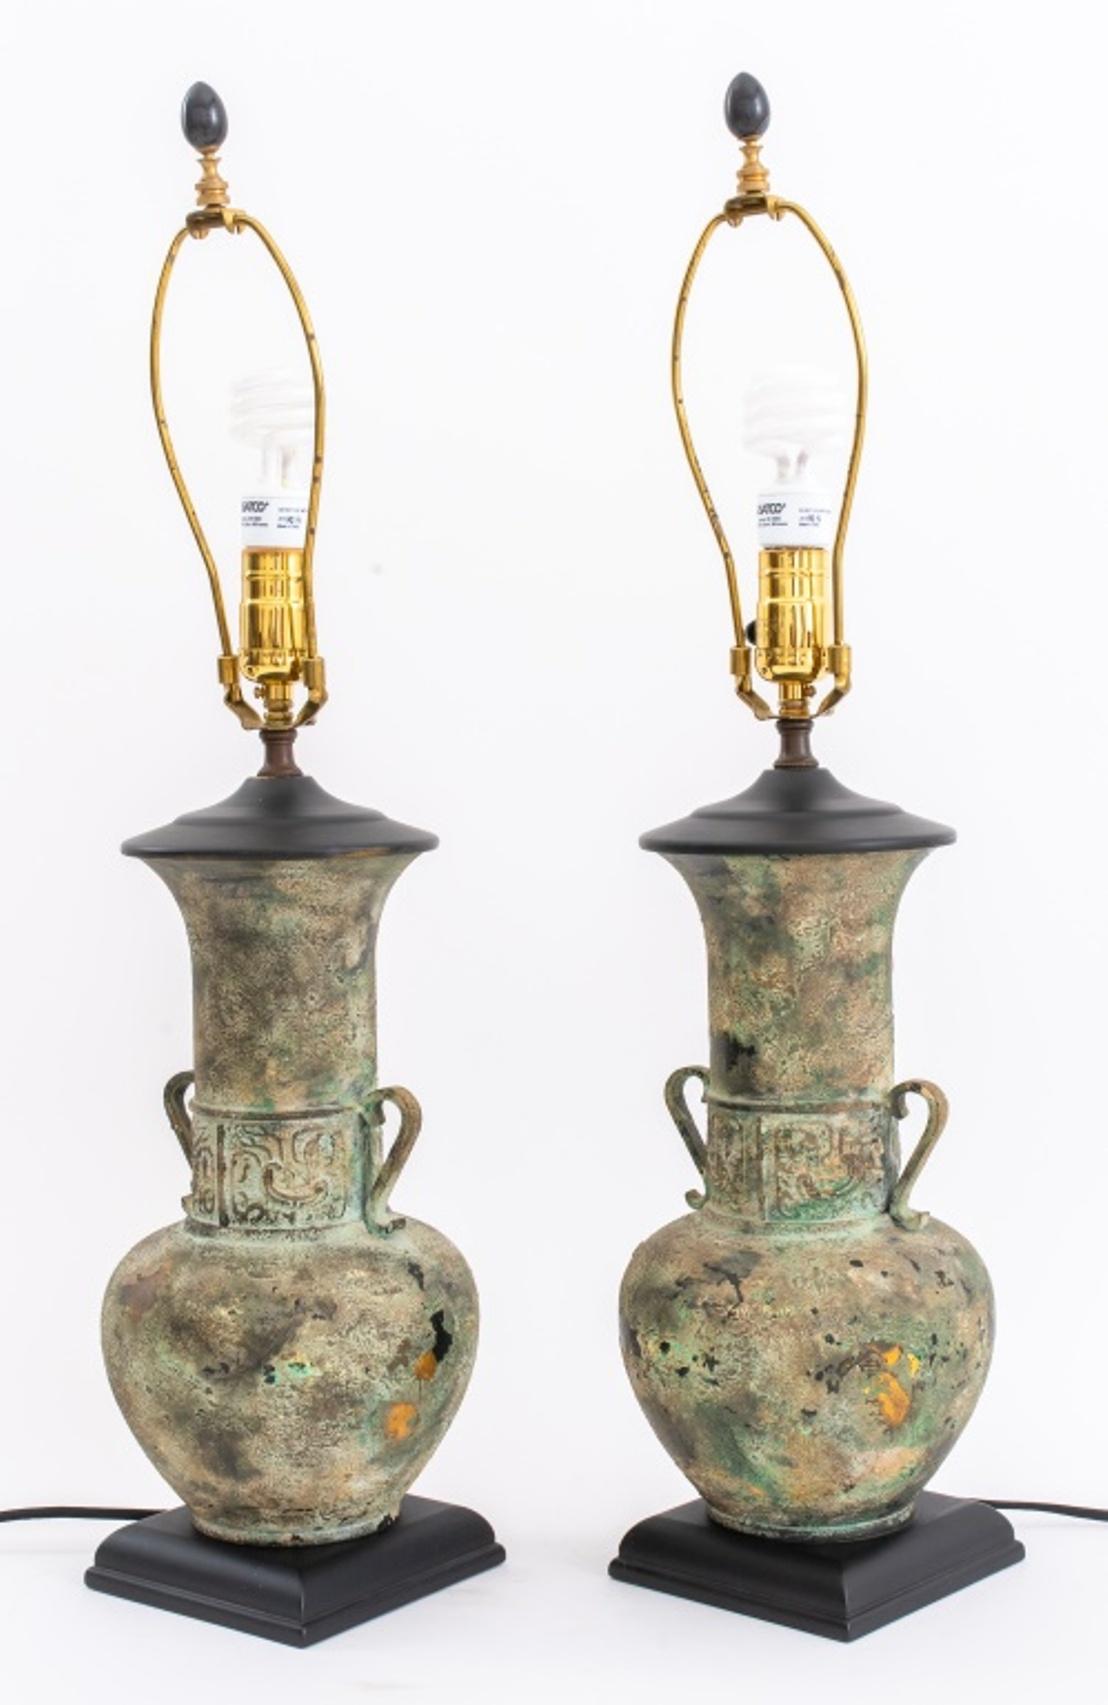 Pair of Ancient Greek revival patinated and chased brass amphora form table lamps with handles.

Dimensions: 28